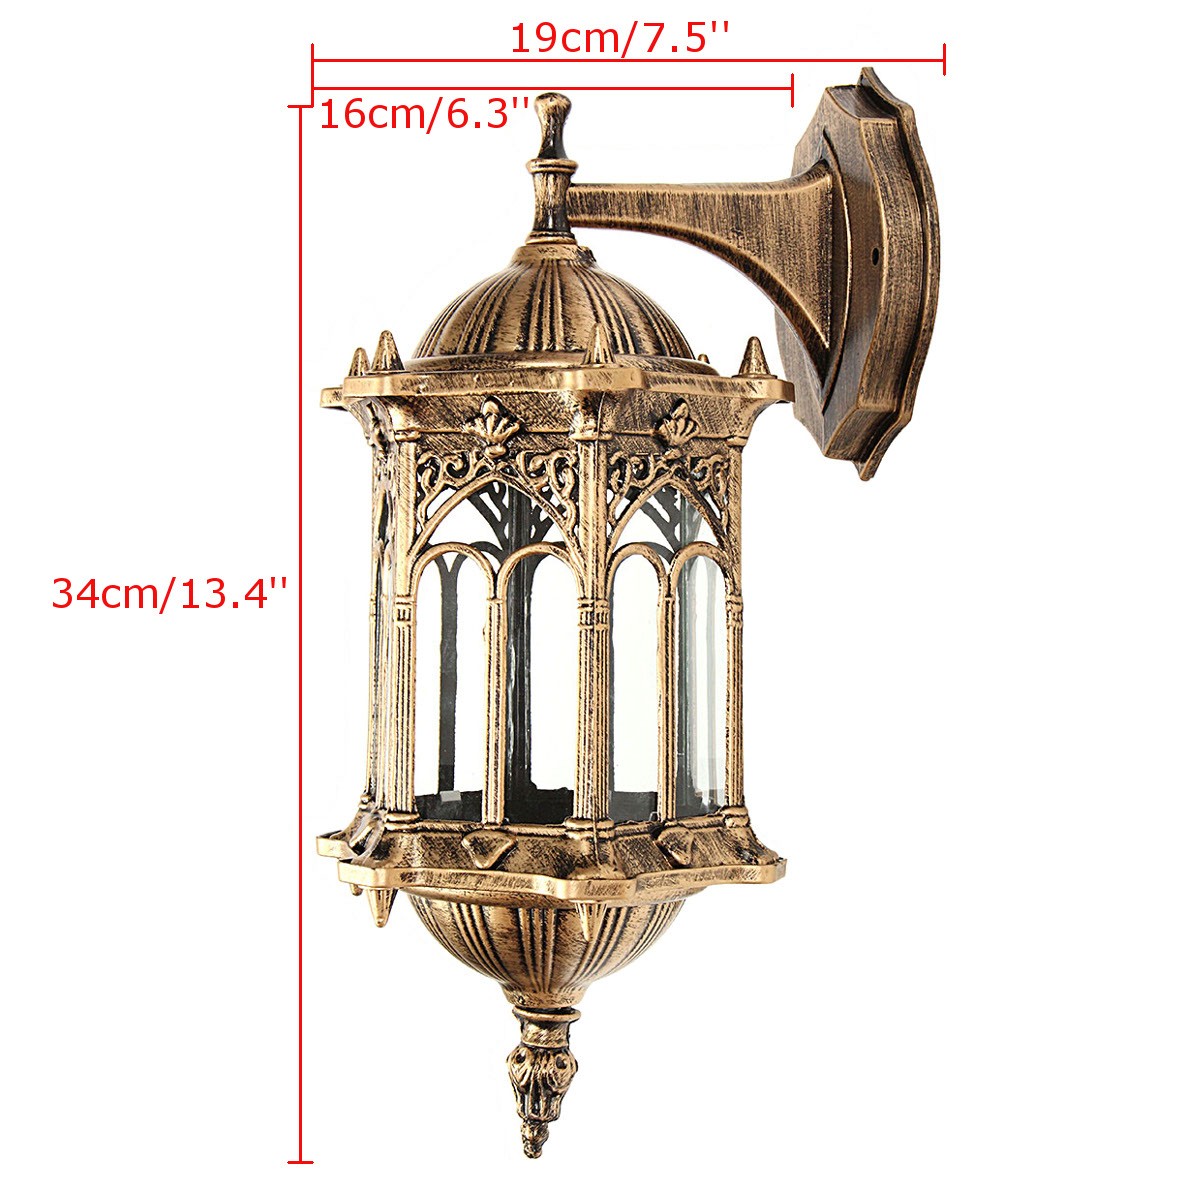 Outdoor Porch Light LED Exterior Fixtures with E26/E27 Base LED Bulb Aluminum Glass Lantern Sconce Antique Brass Wall Lamp Holder for Garden, Garage - image 2 of 7